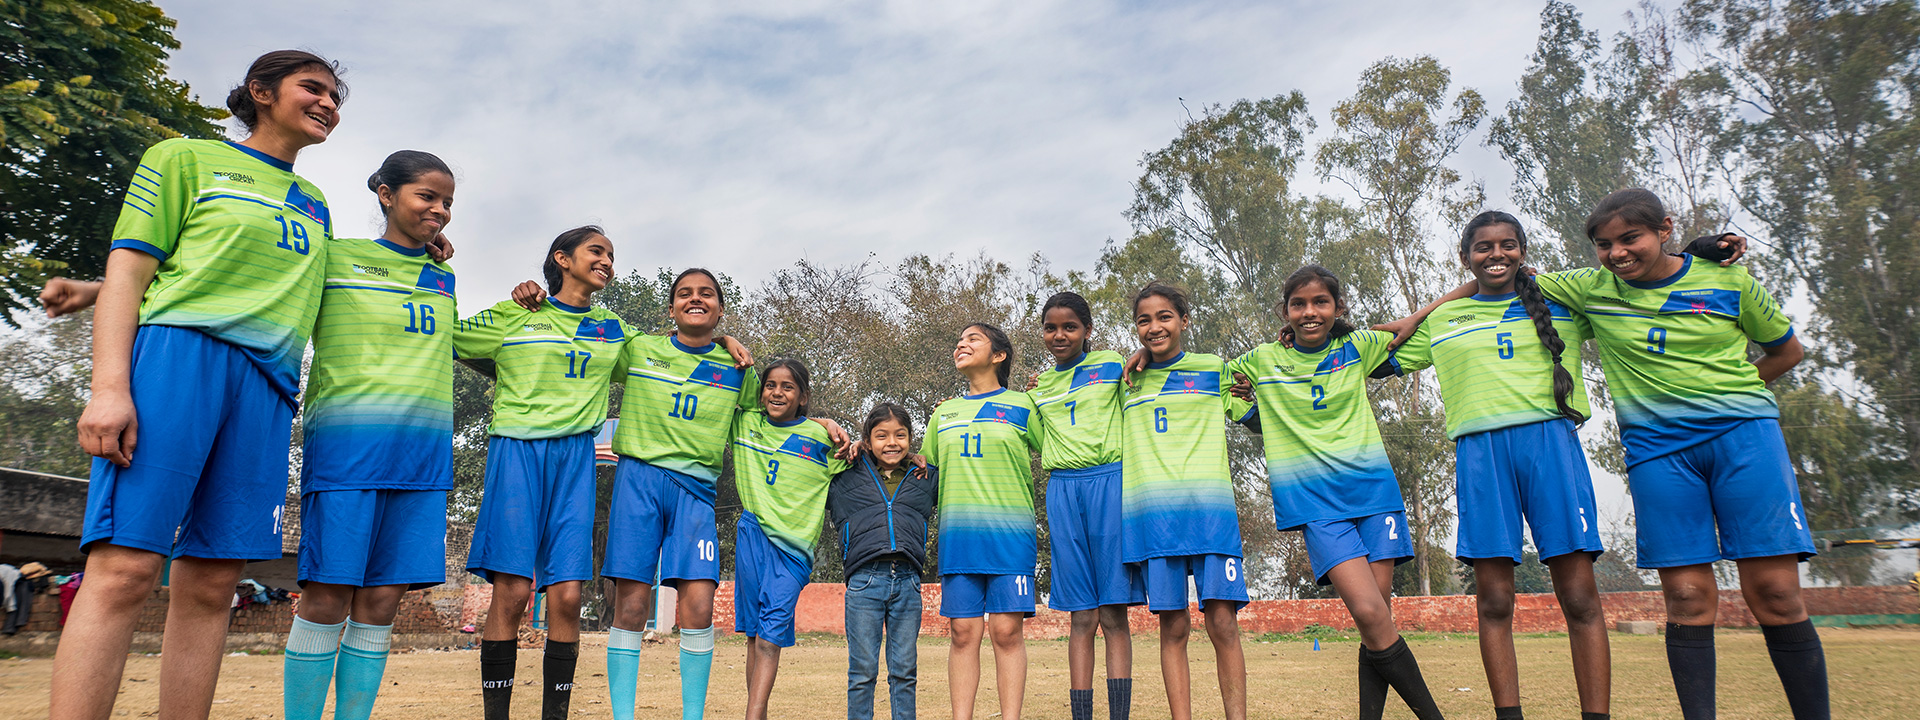 Gift Her A Football – This Women’s Day, Gift 400 Footballs To The Girls Of Punjab